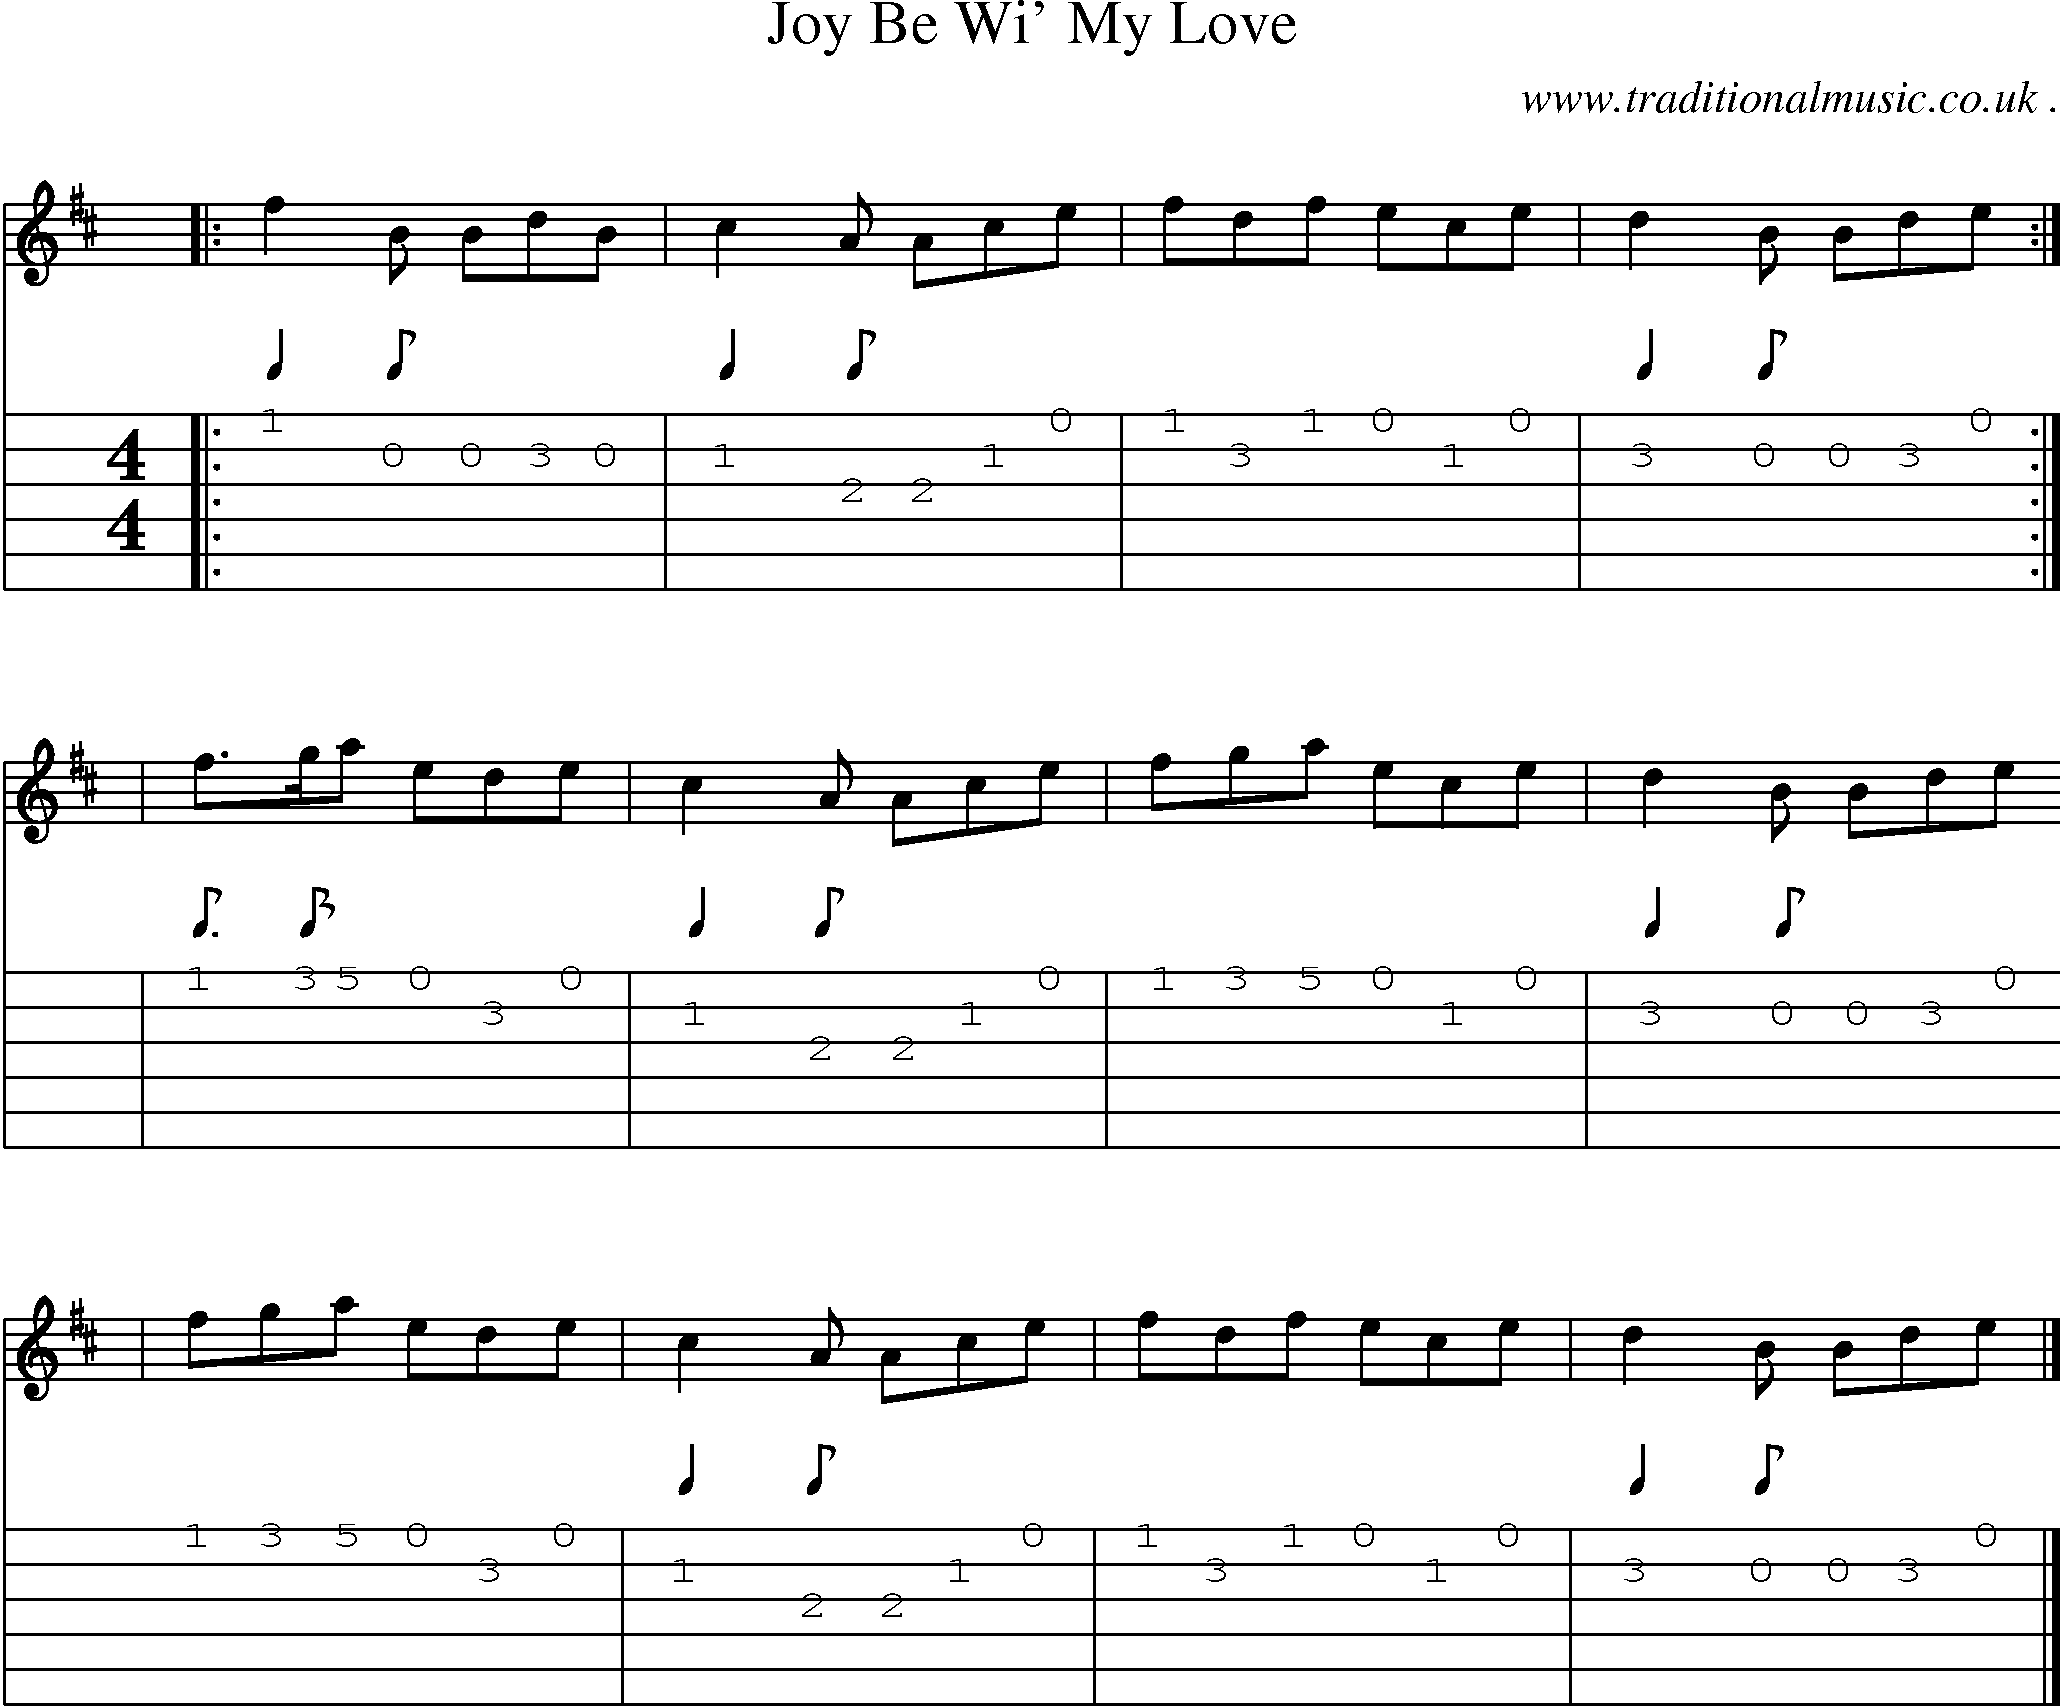 Sheet-music  score, Chords and Guitar Tabs for Joy Be Wi My Love